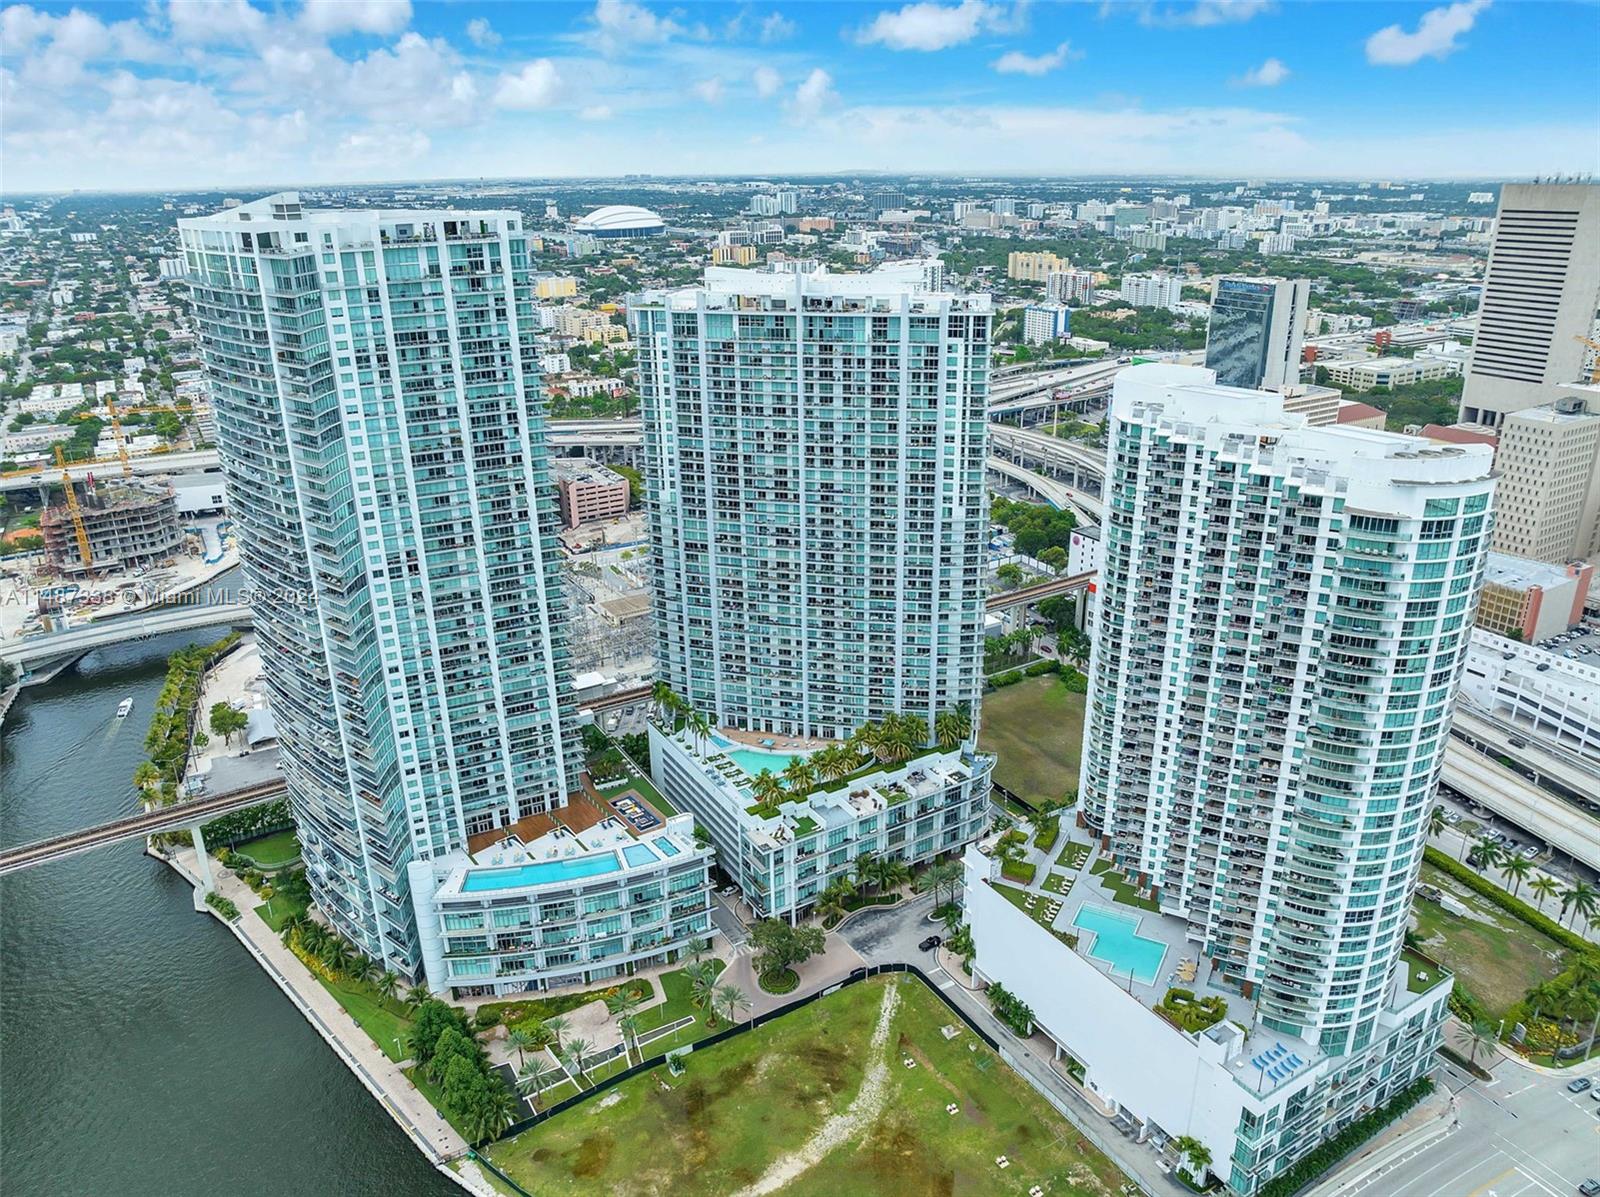 Immerse yourself in waterfront luxury at 92 SW 3rd St #305, Miami, FL. Priced at $900,000, this 3-bed, 3-bath condo offers 1,683 sq ft of sleek living space with VIP views of riverfront bliss. Nestled in the vibrant heart of Miami, it's steps away from Brickell City Centre, top dining, and entertainment, embodying resort-style living with city access. The Mint's exceptional amenities enhance a lifestyle of elegance and convenience, ensuring every day feels like a getaway. With easy access to highways, public transport, and Miami's beaches, it’s your slice of paradise. Secure your viewing today and step into the sophisticated life you deserve at The Mint.